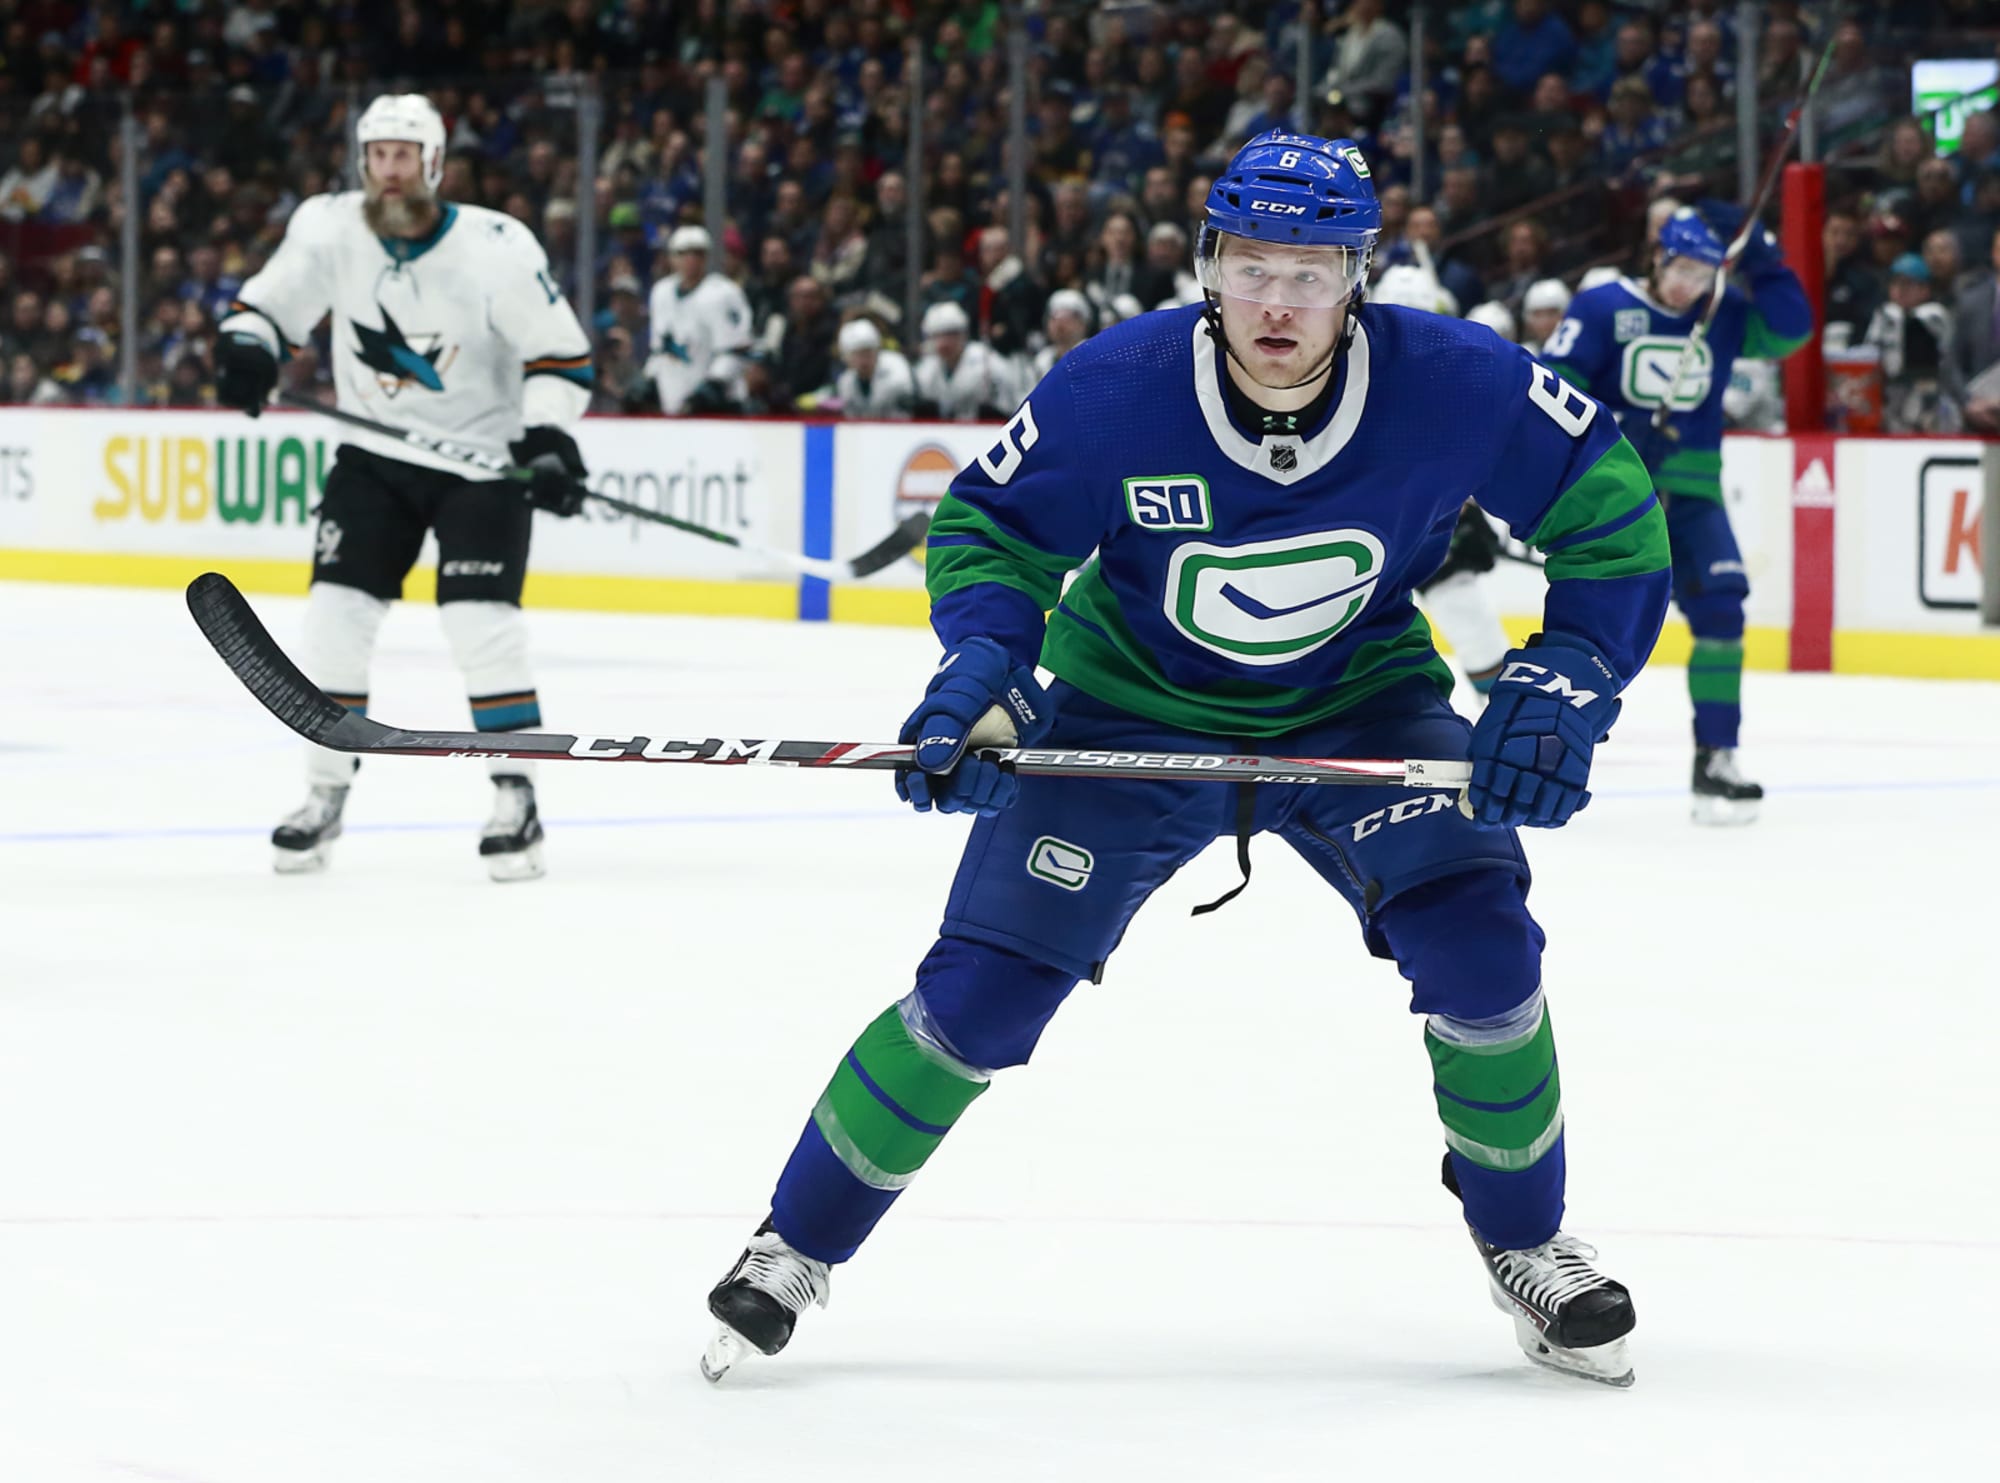 As all-star weekend proved, Canucks' Brock Boeser is going to be a